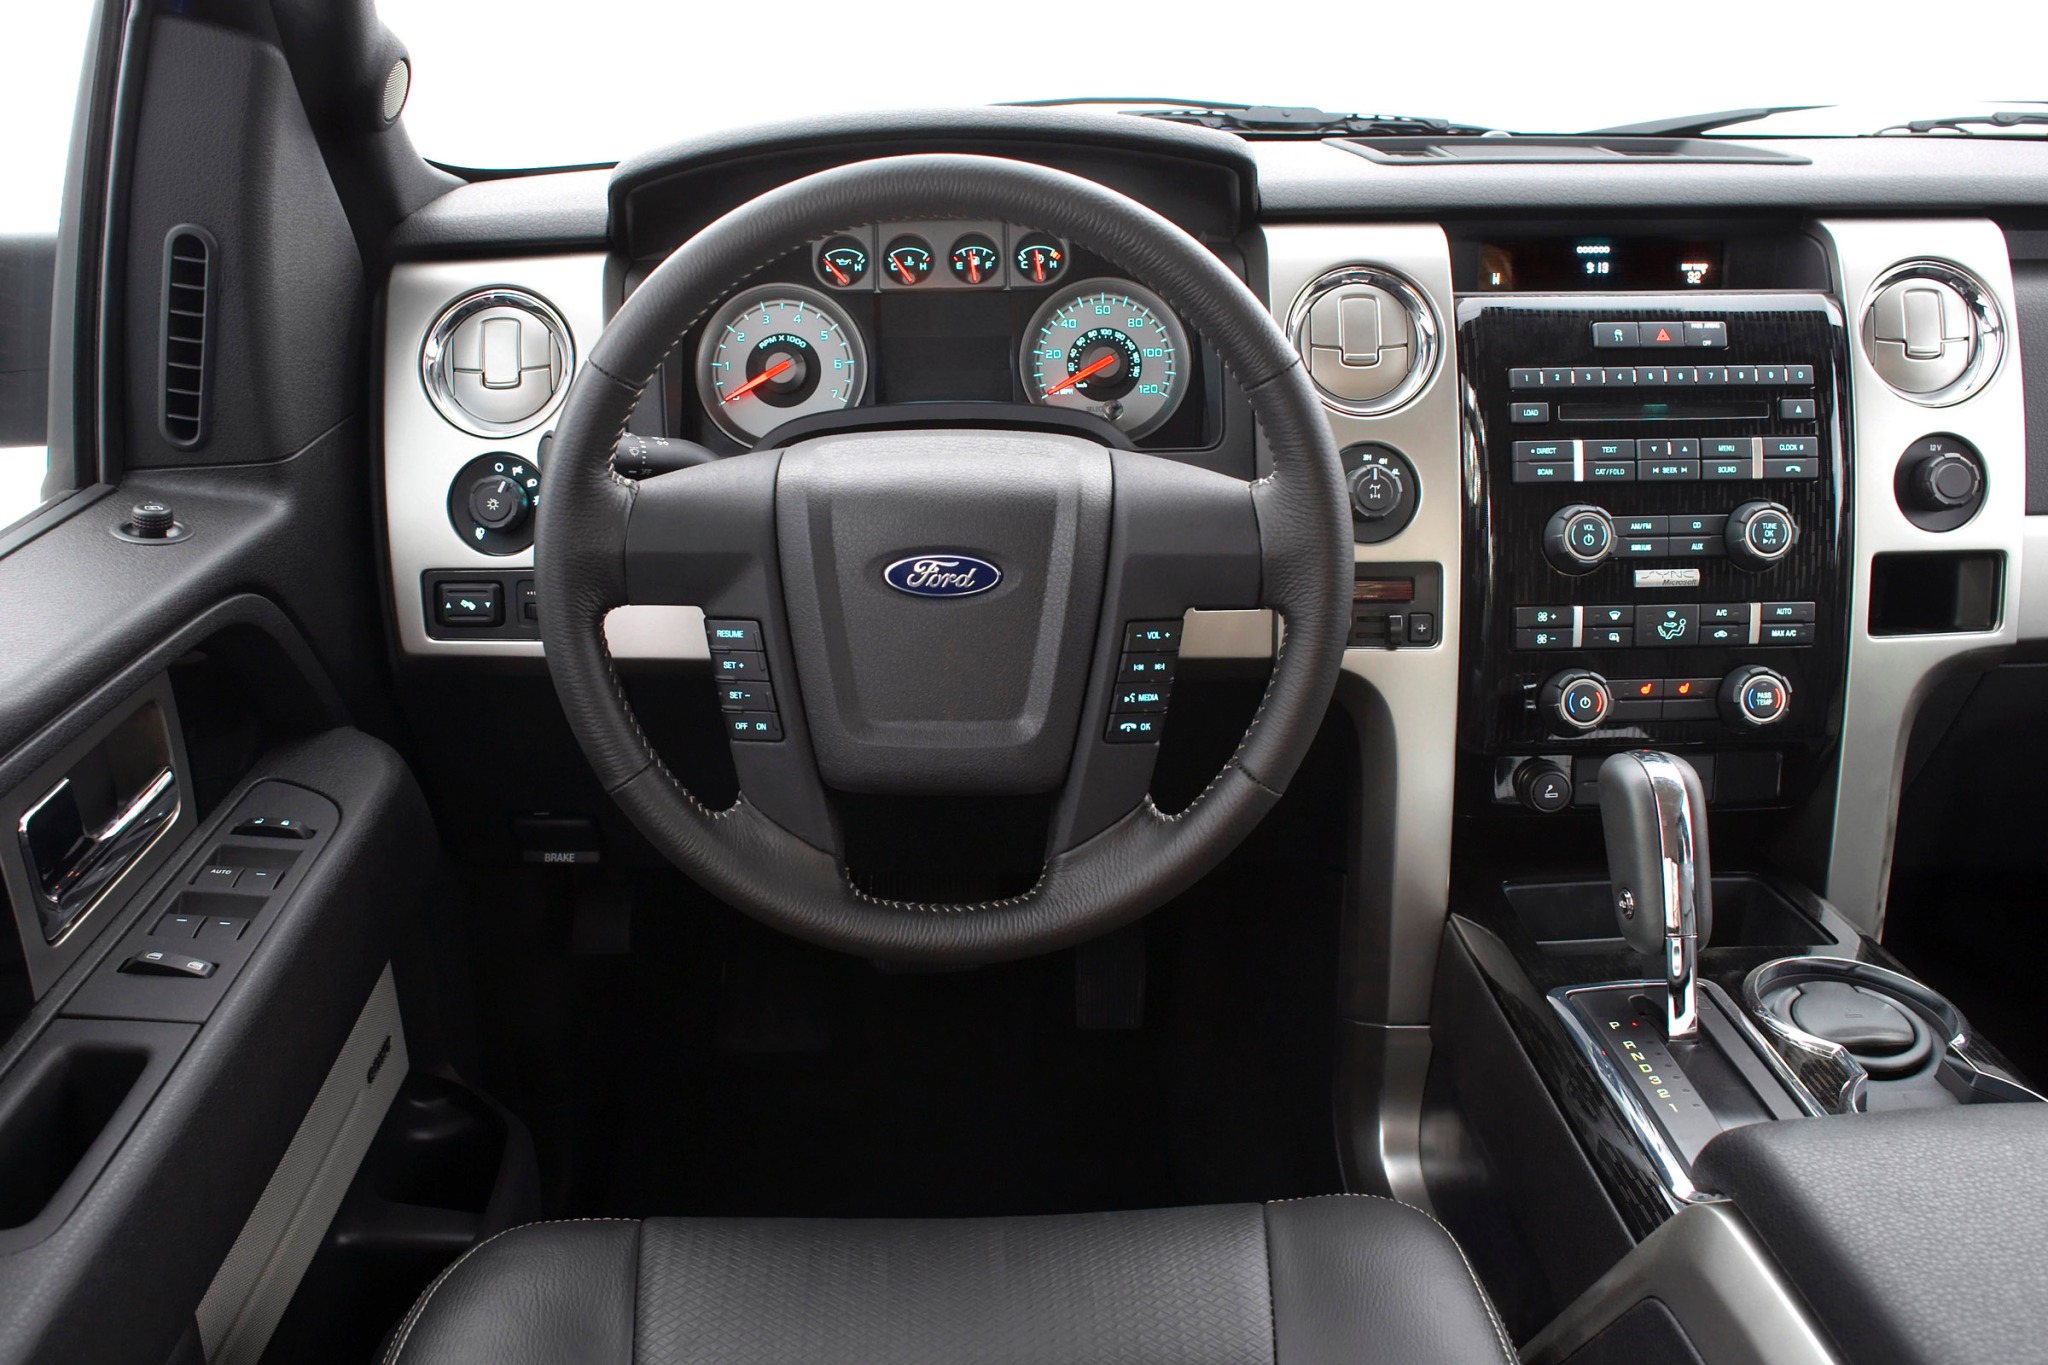 2010 Ford F-150 FX4 Extended Cab Pickup Dashboard